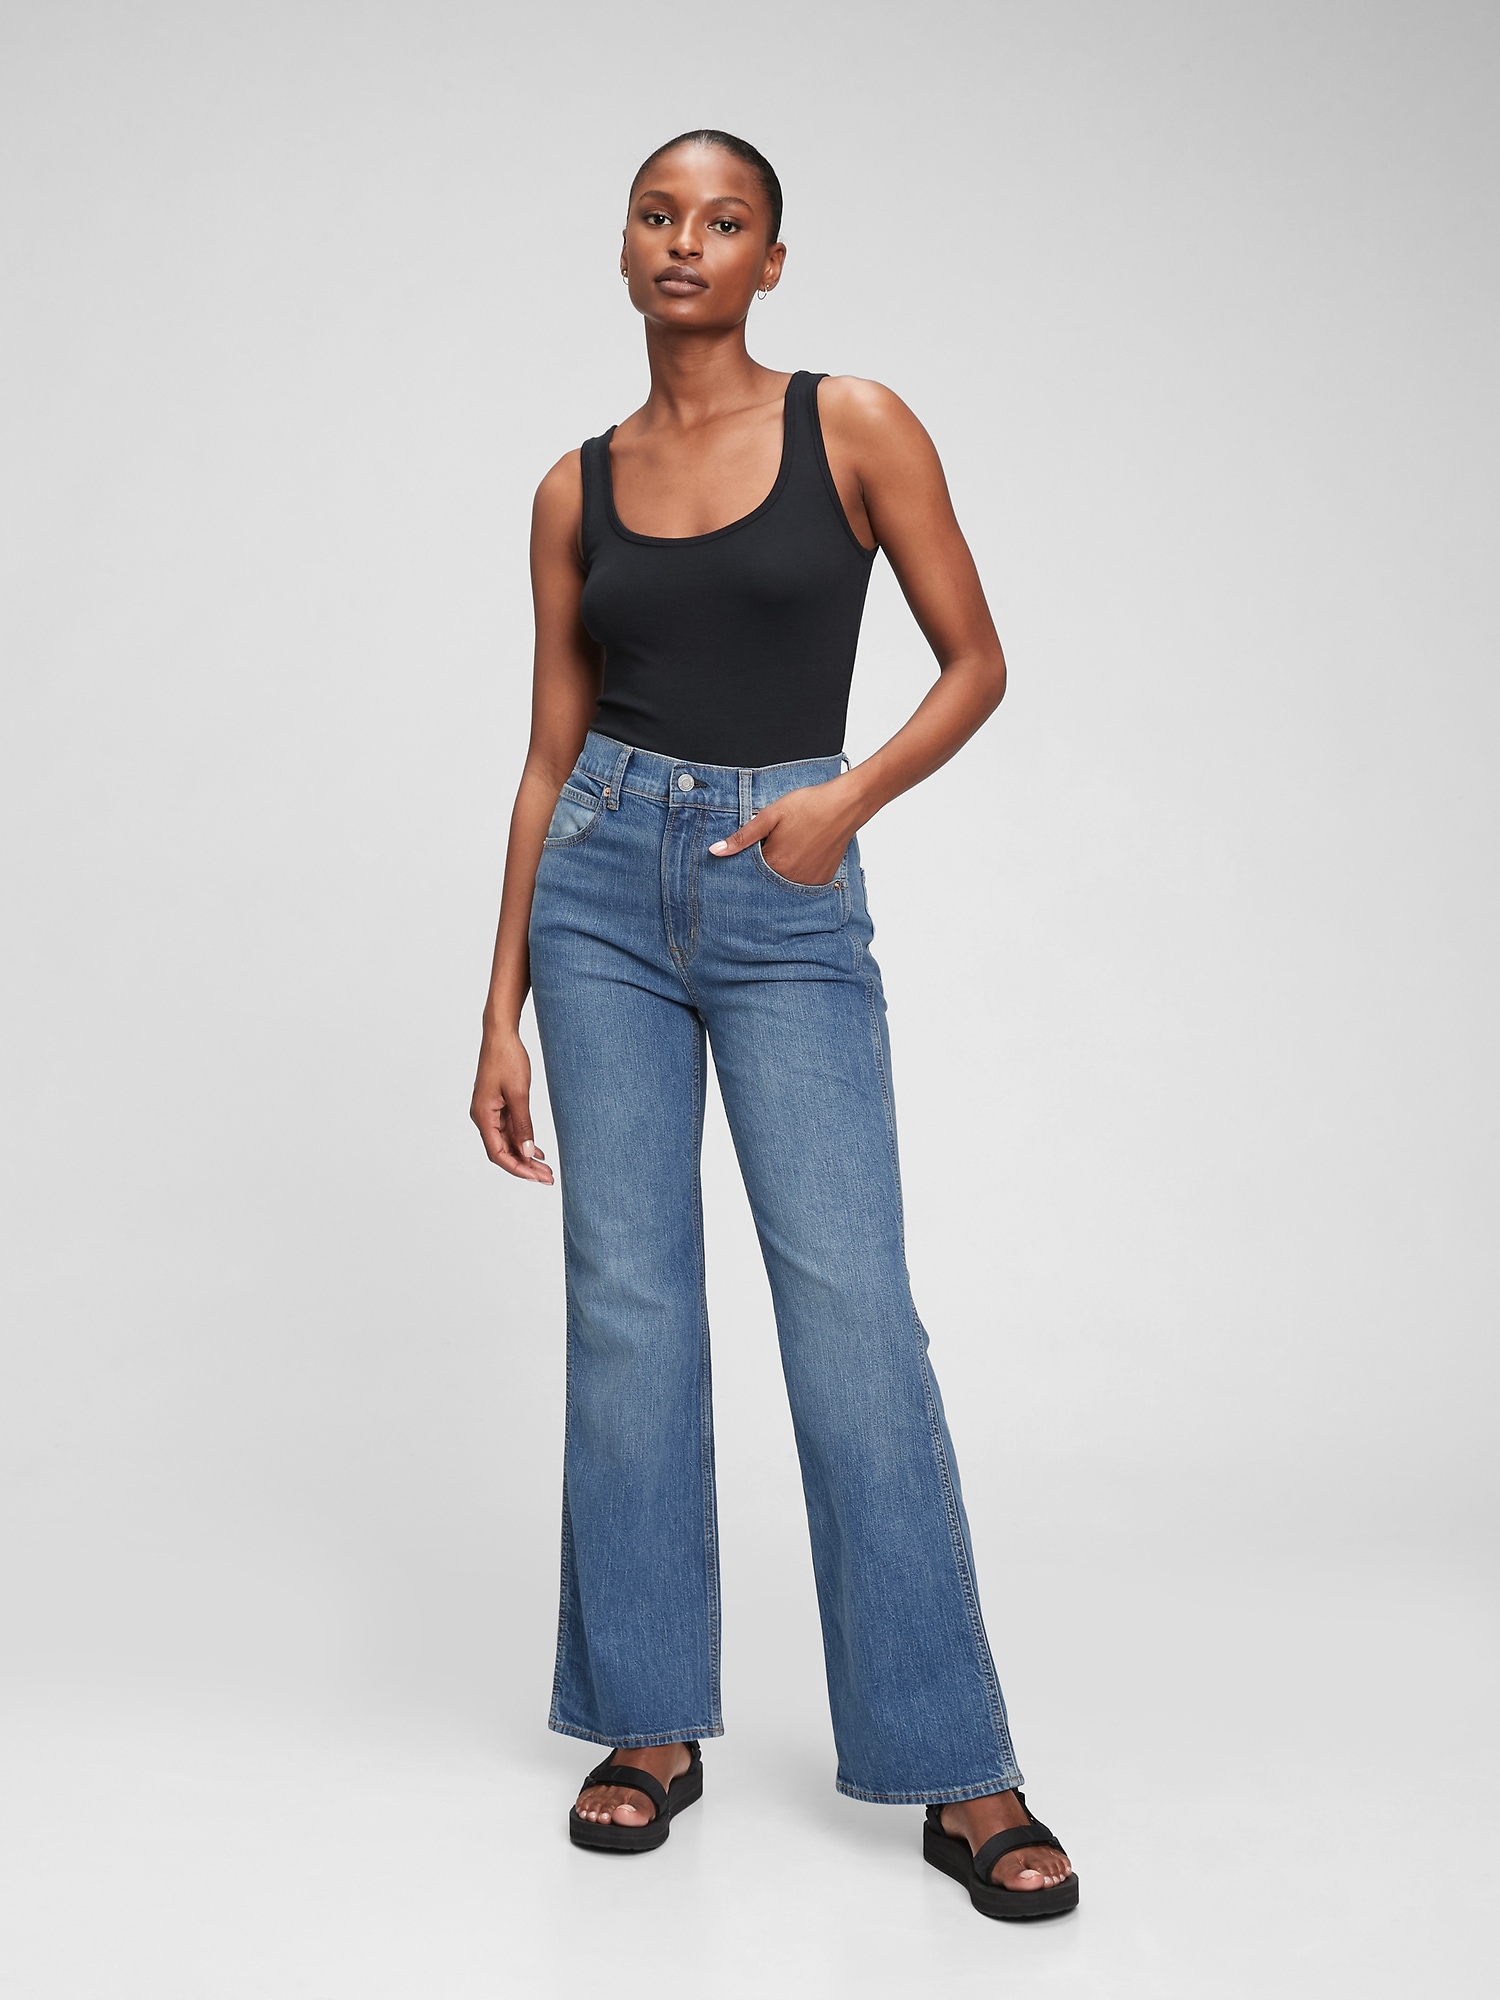 High Rise Vintage Flare Jeans with Washwell | Gap